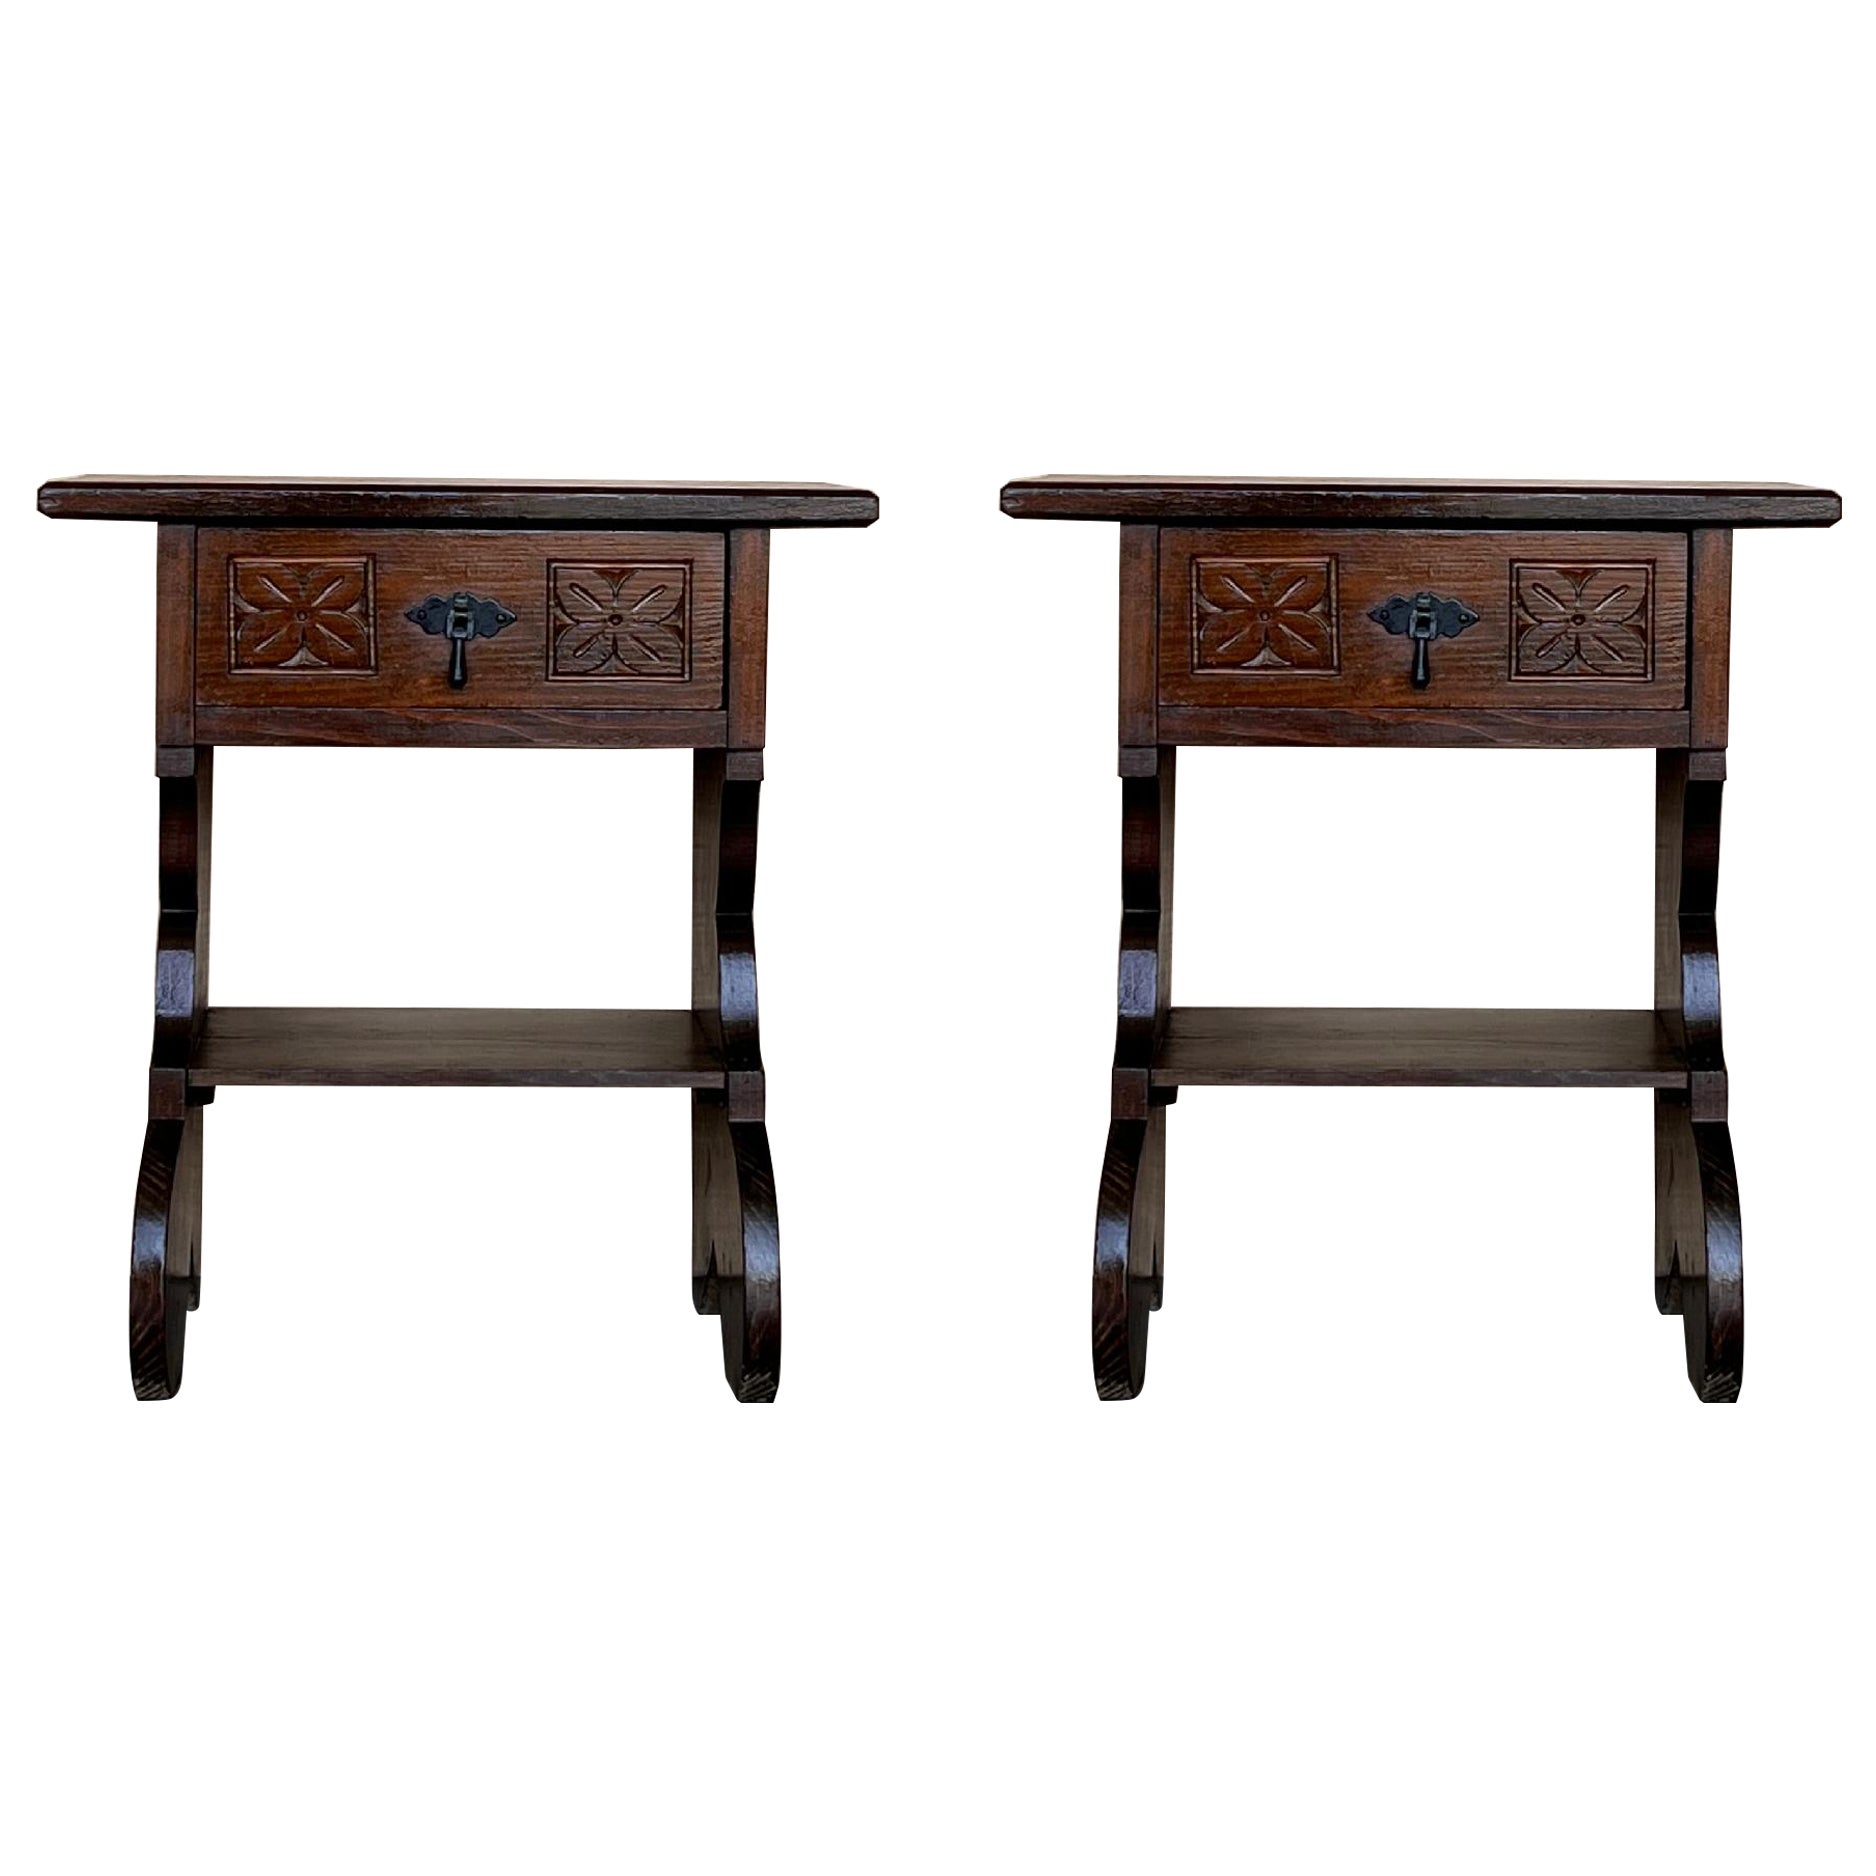 20th Pair of Narrow Spanish Nightstands with Carved Drawer and Low Shelve For Sale